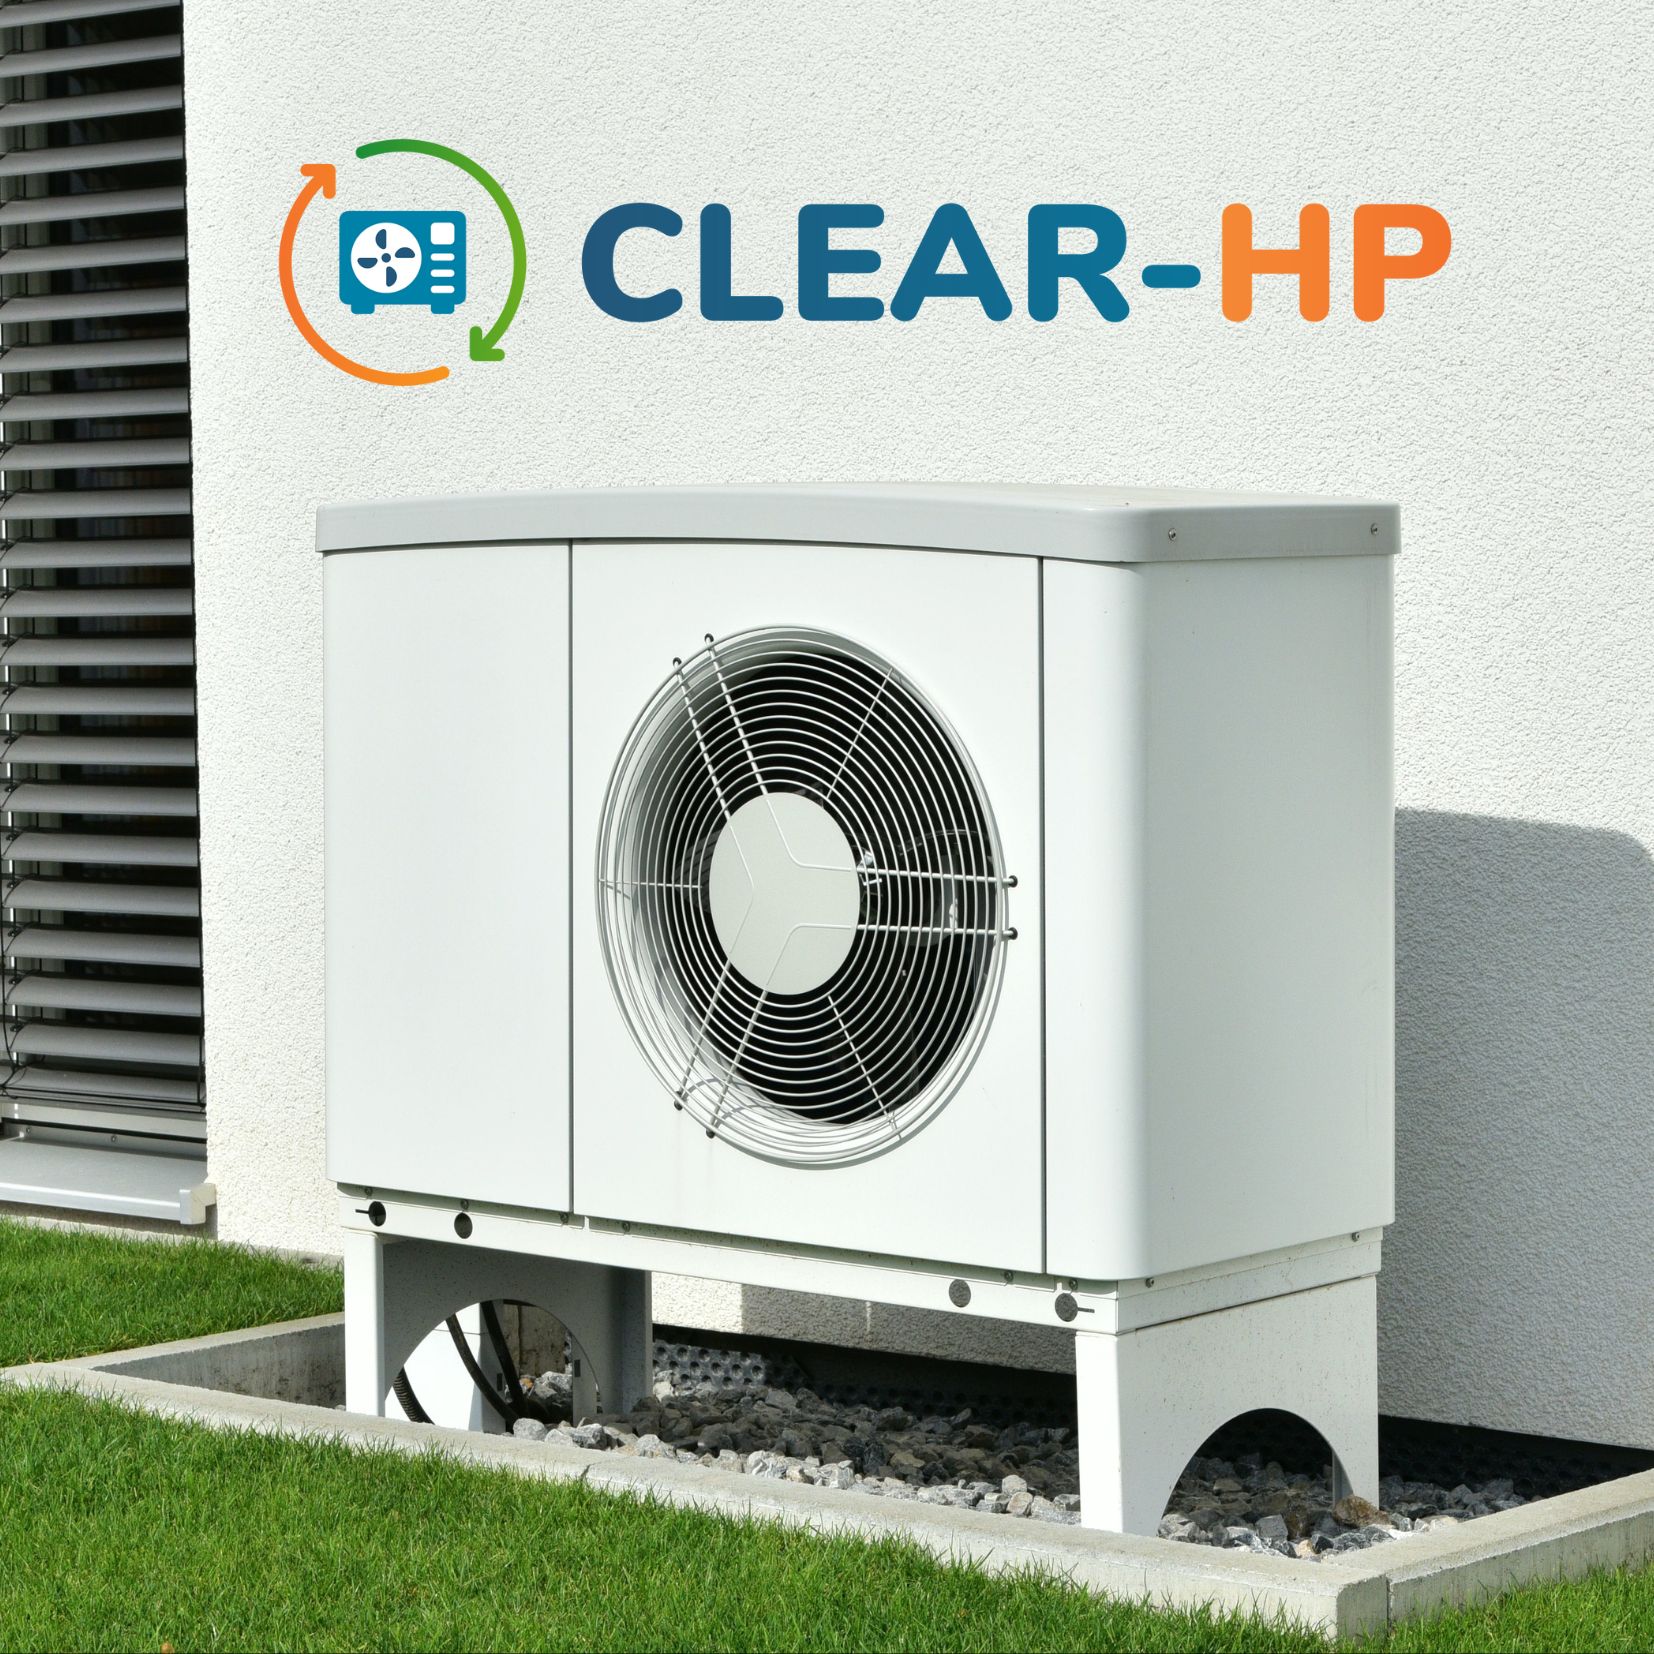 CLEAR-HP, image of a heat pump